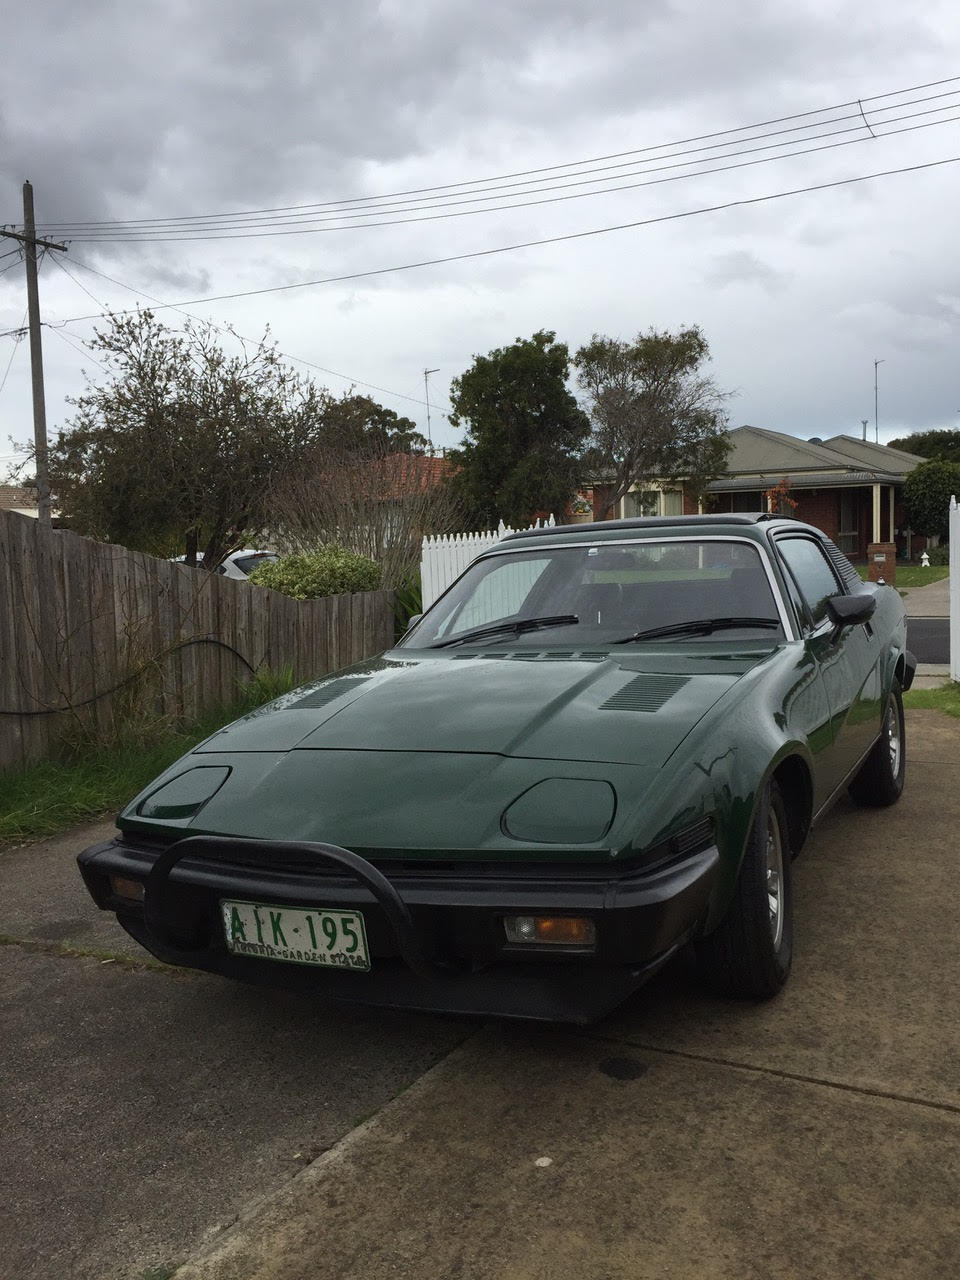 David's green TR7 for sale